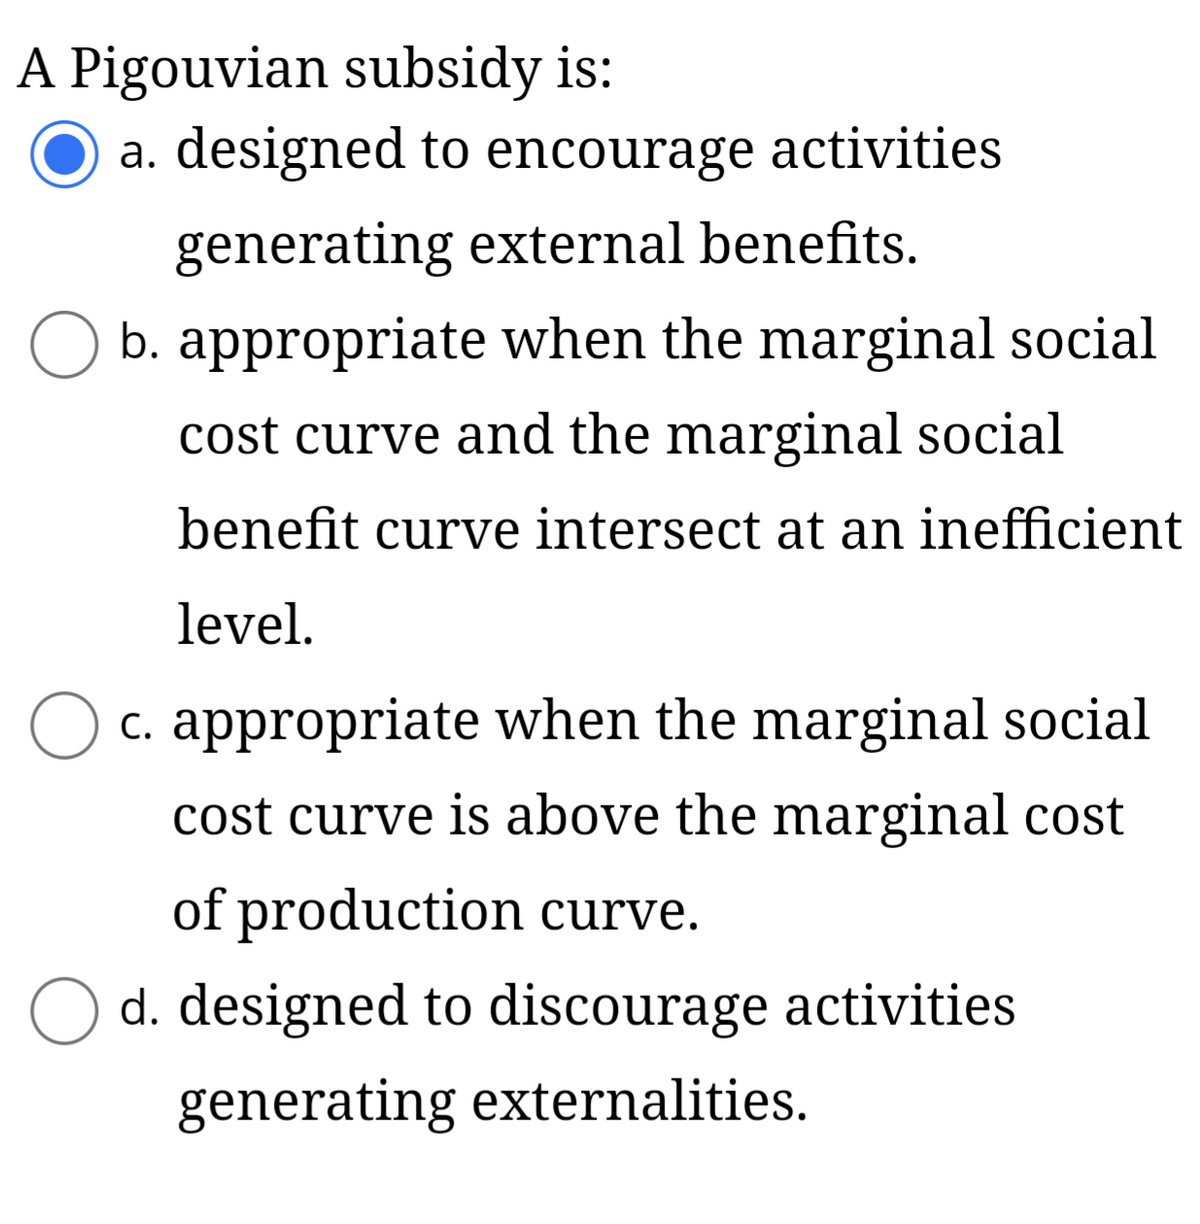 A Pigouvian subsidy is:
a. designed to encourage activities
generating external benefits.
b. appropriate when the marginal social
cost curve and the marginal social
benefit curve intersect at an inefficient
level.
O c. appropriate when the marginal social
cost curve is above the marginal cost
of production curve.
d. designed to discourage activities
generating externalities.